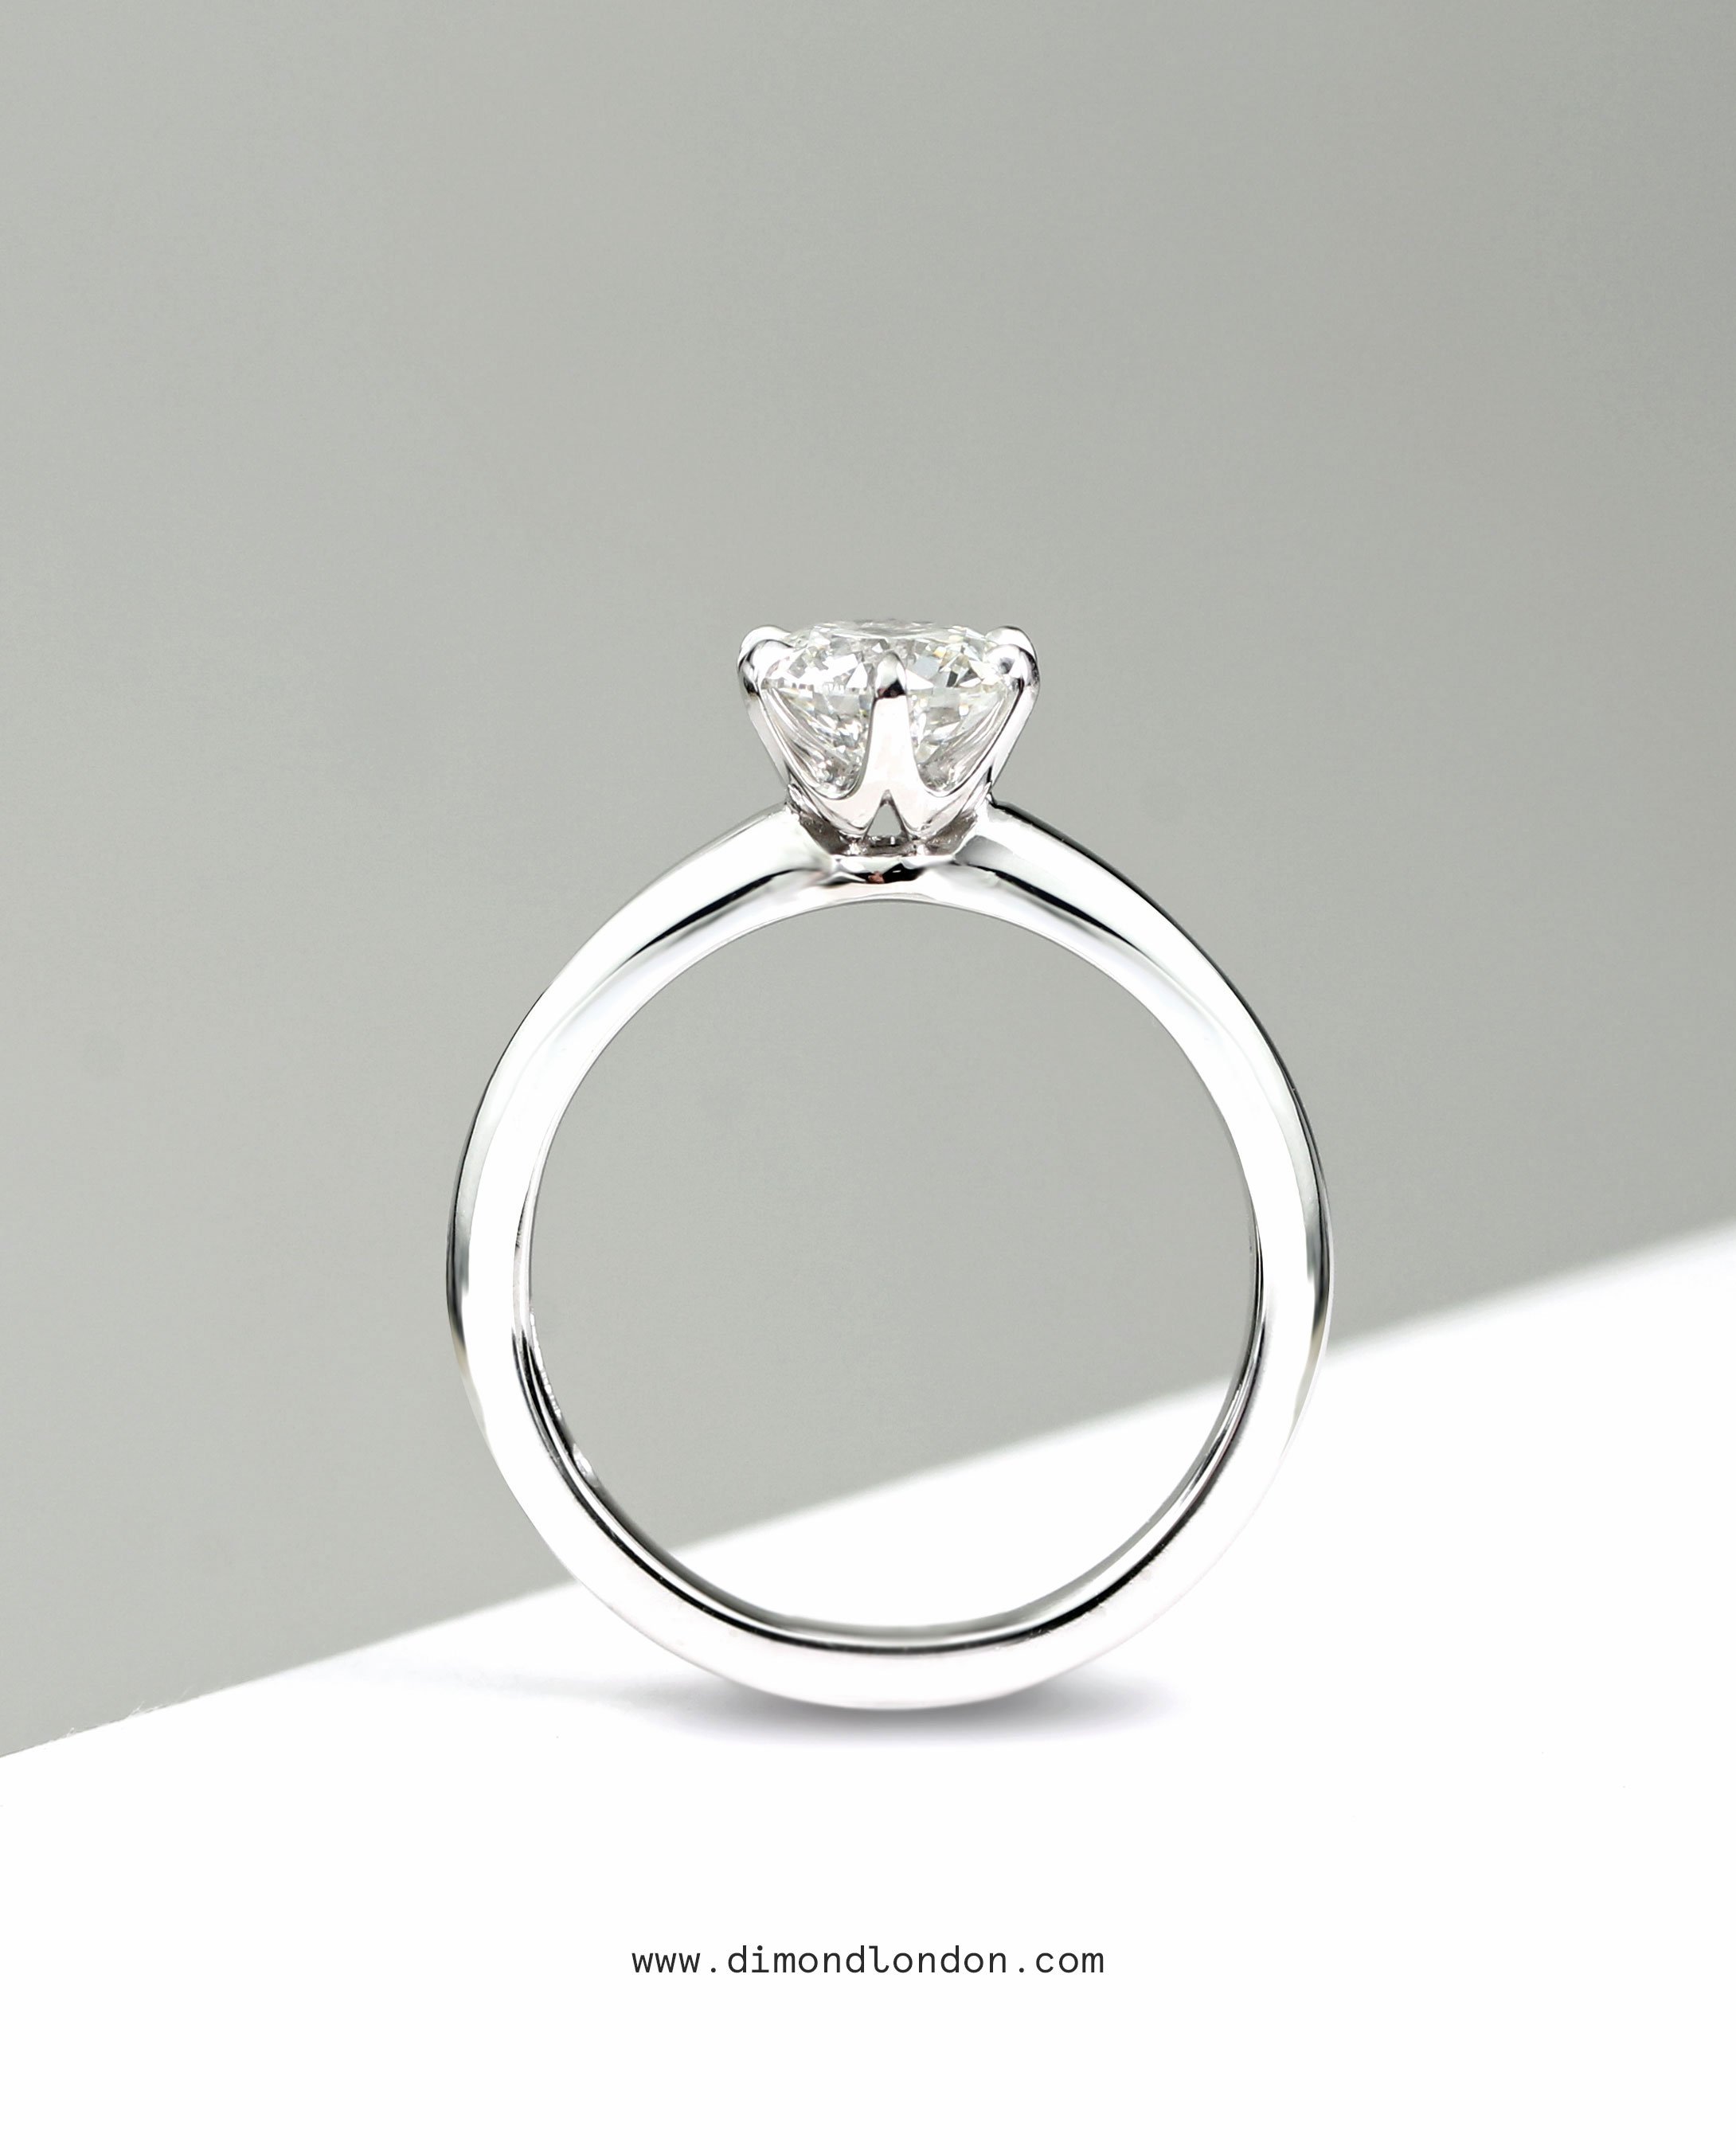 Average spend on engagement rings in London rises 50% in 2022